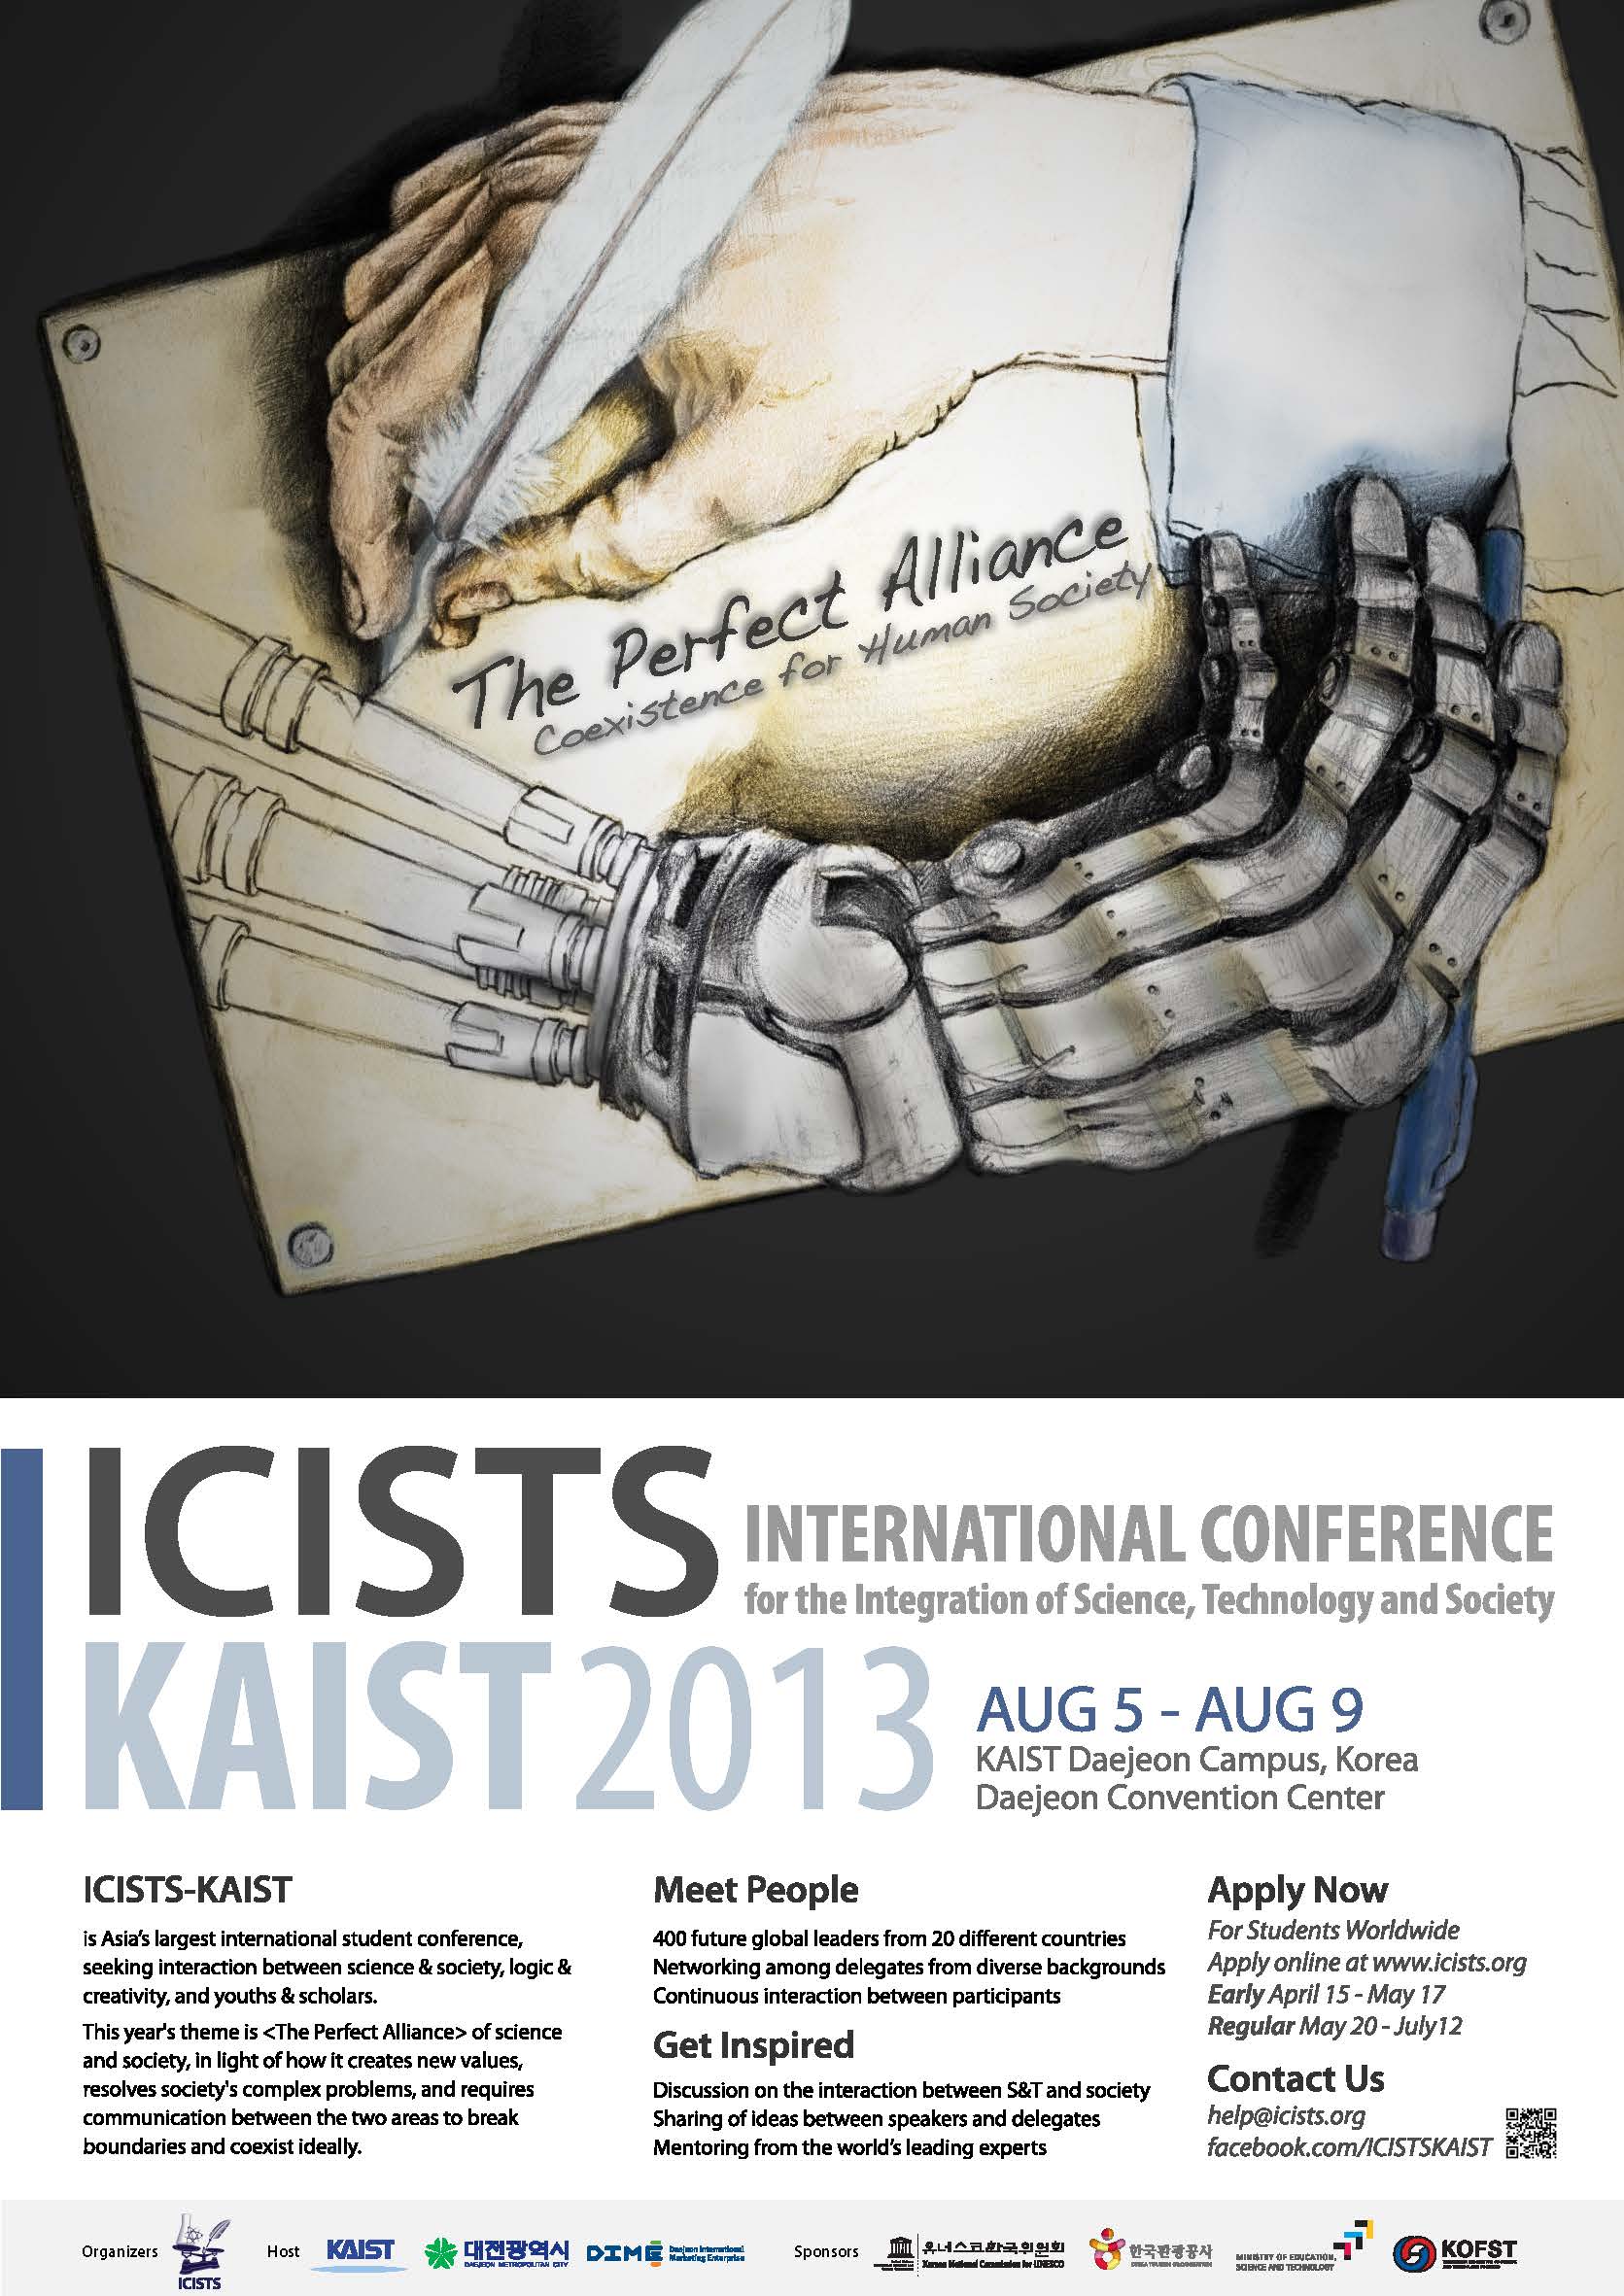 International Student Conference (ICISTS-KAIST) to be Held in August 이미지